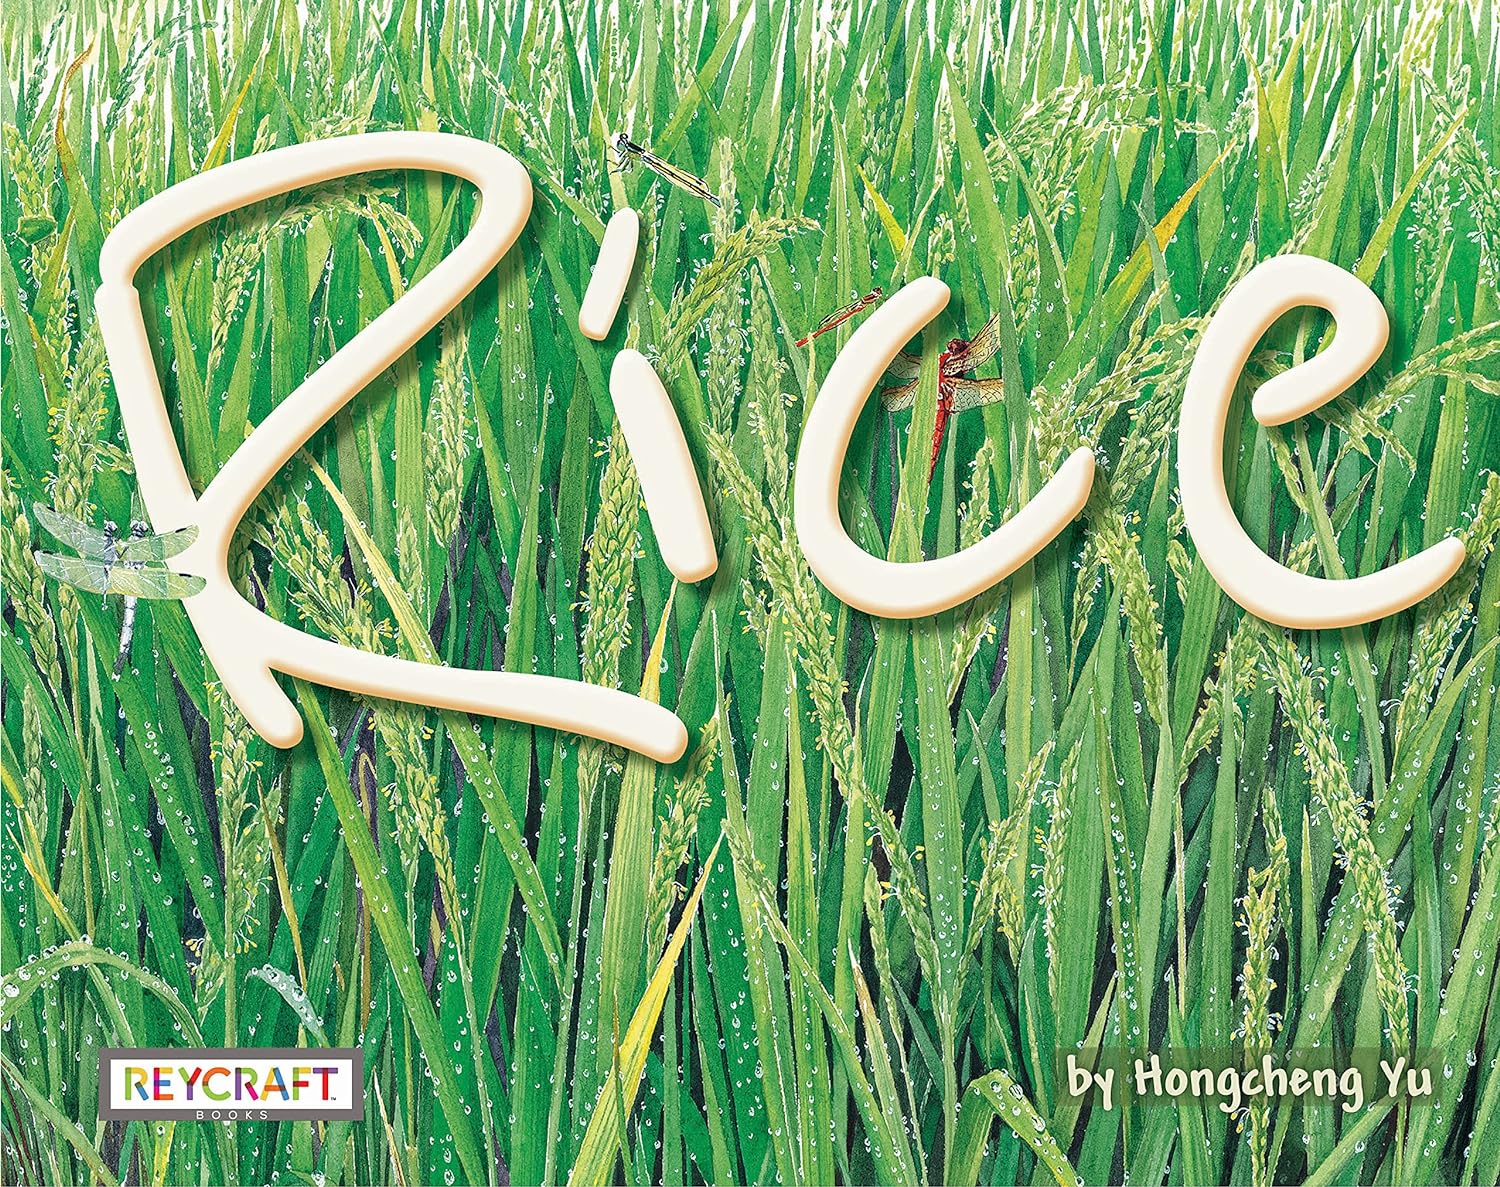 Cover for Rice featuring a close up of the green plants that grow out of rice fields with dew on the leaves and the title 'Rice' in large print made up of rice kernels. There are dragonflies flying among the plants.